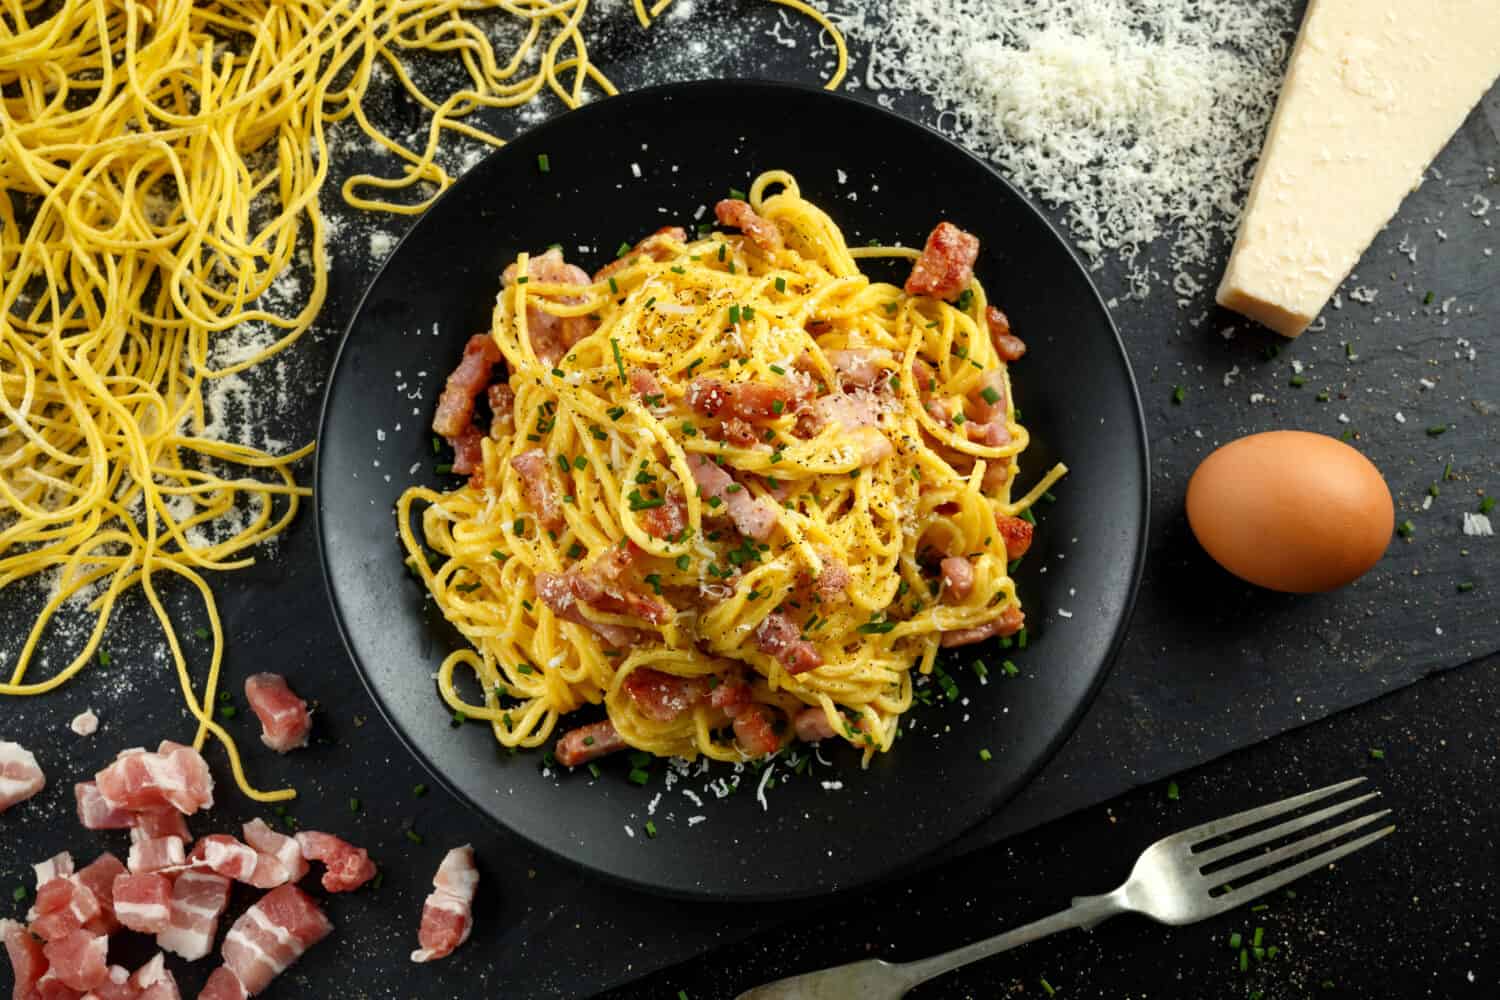 Classic Homemade Pasta carbonara Italian with Bacon, eggs, Parmesan Cheese on black plate.